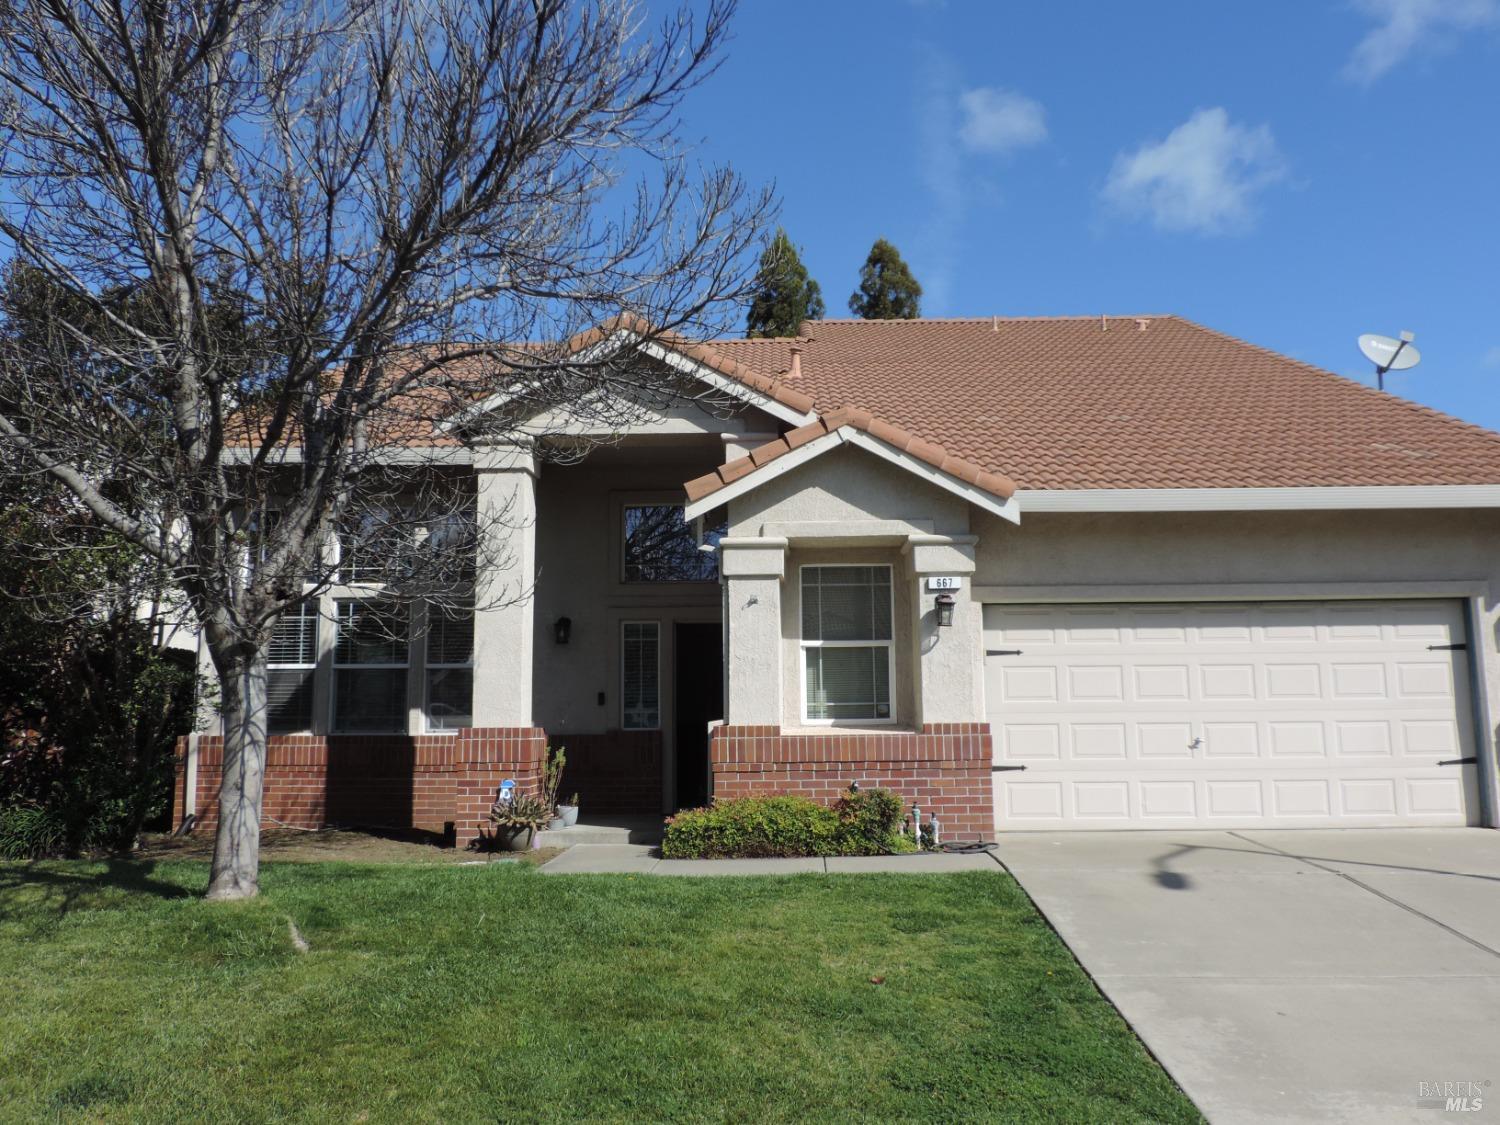 Photo of 667 Edenderry Dr in Vacaville, CA